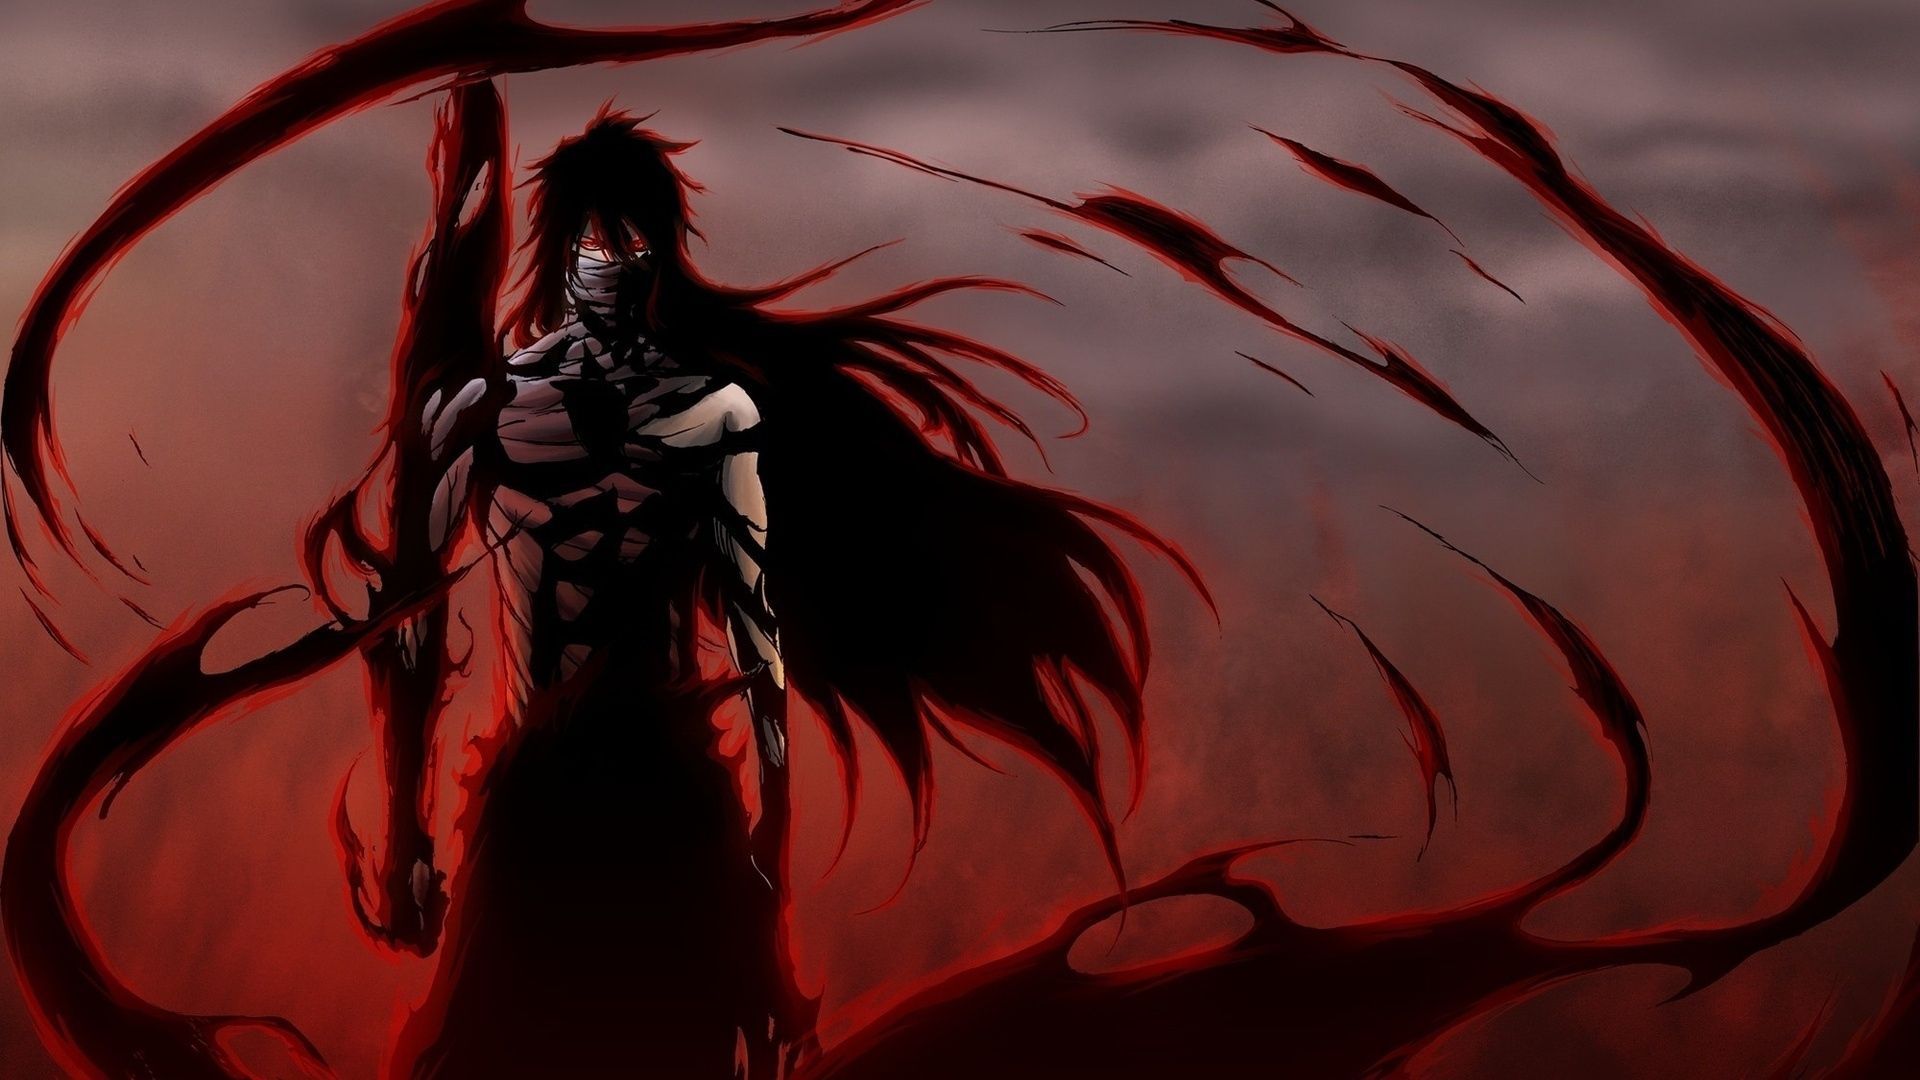 Best Of Anime Hd Wallpapers 1080p Bleach